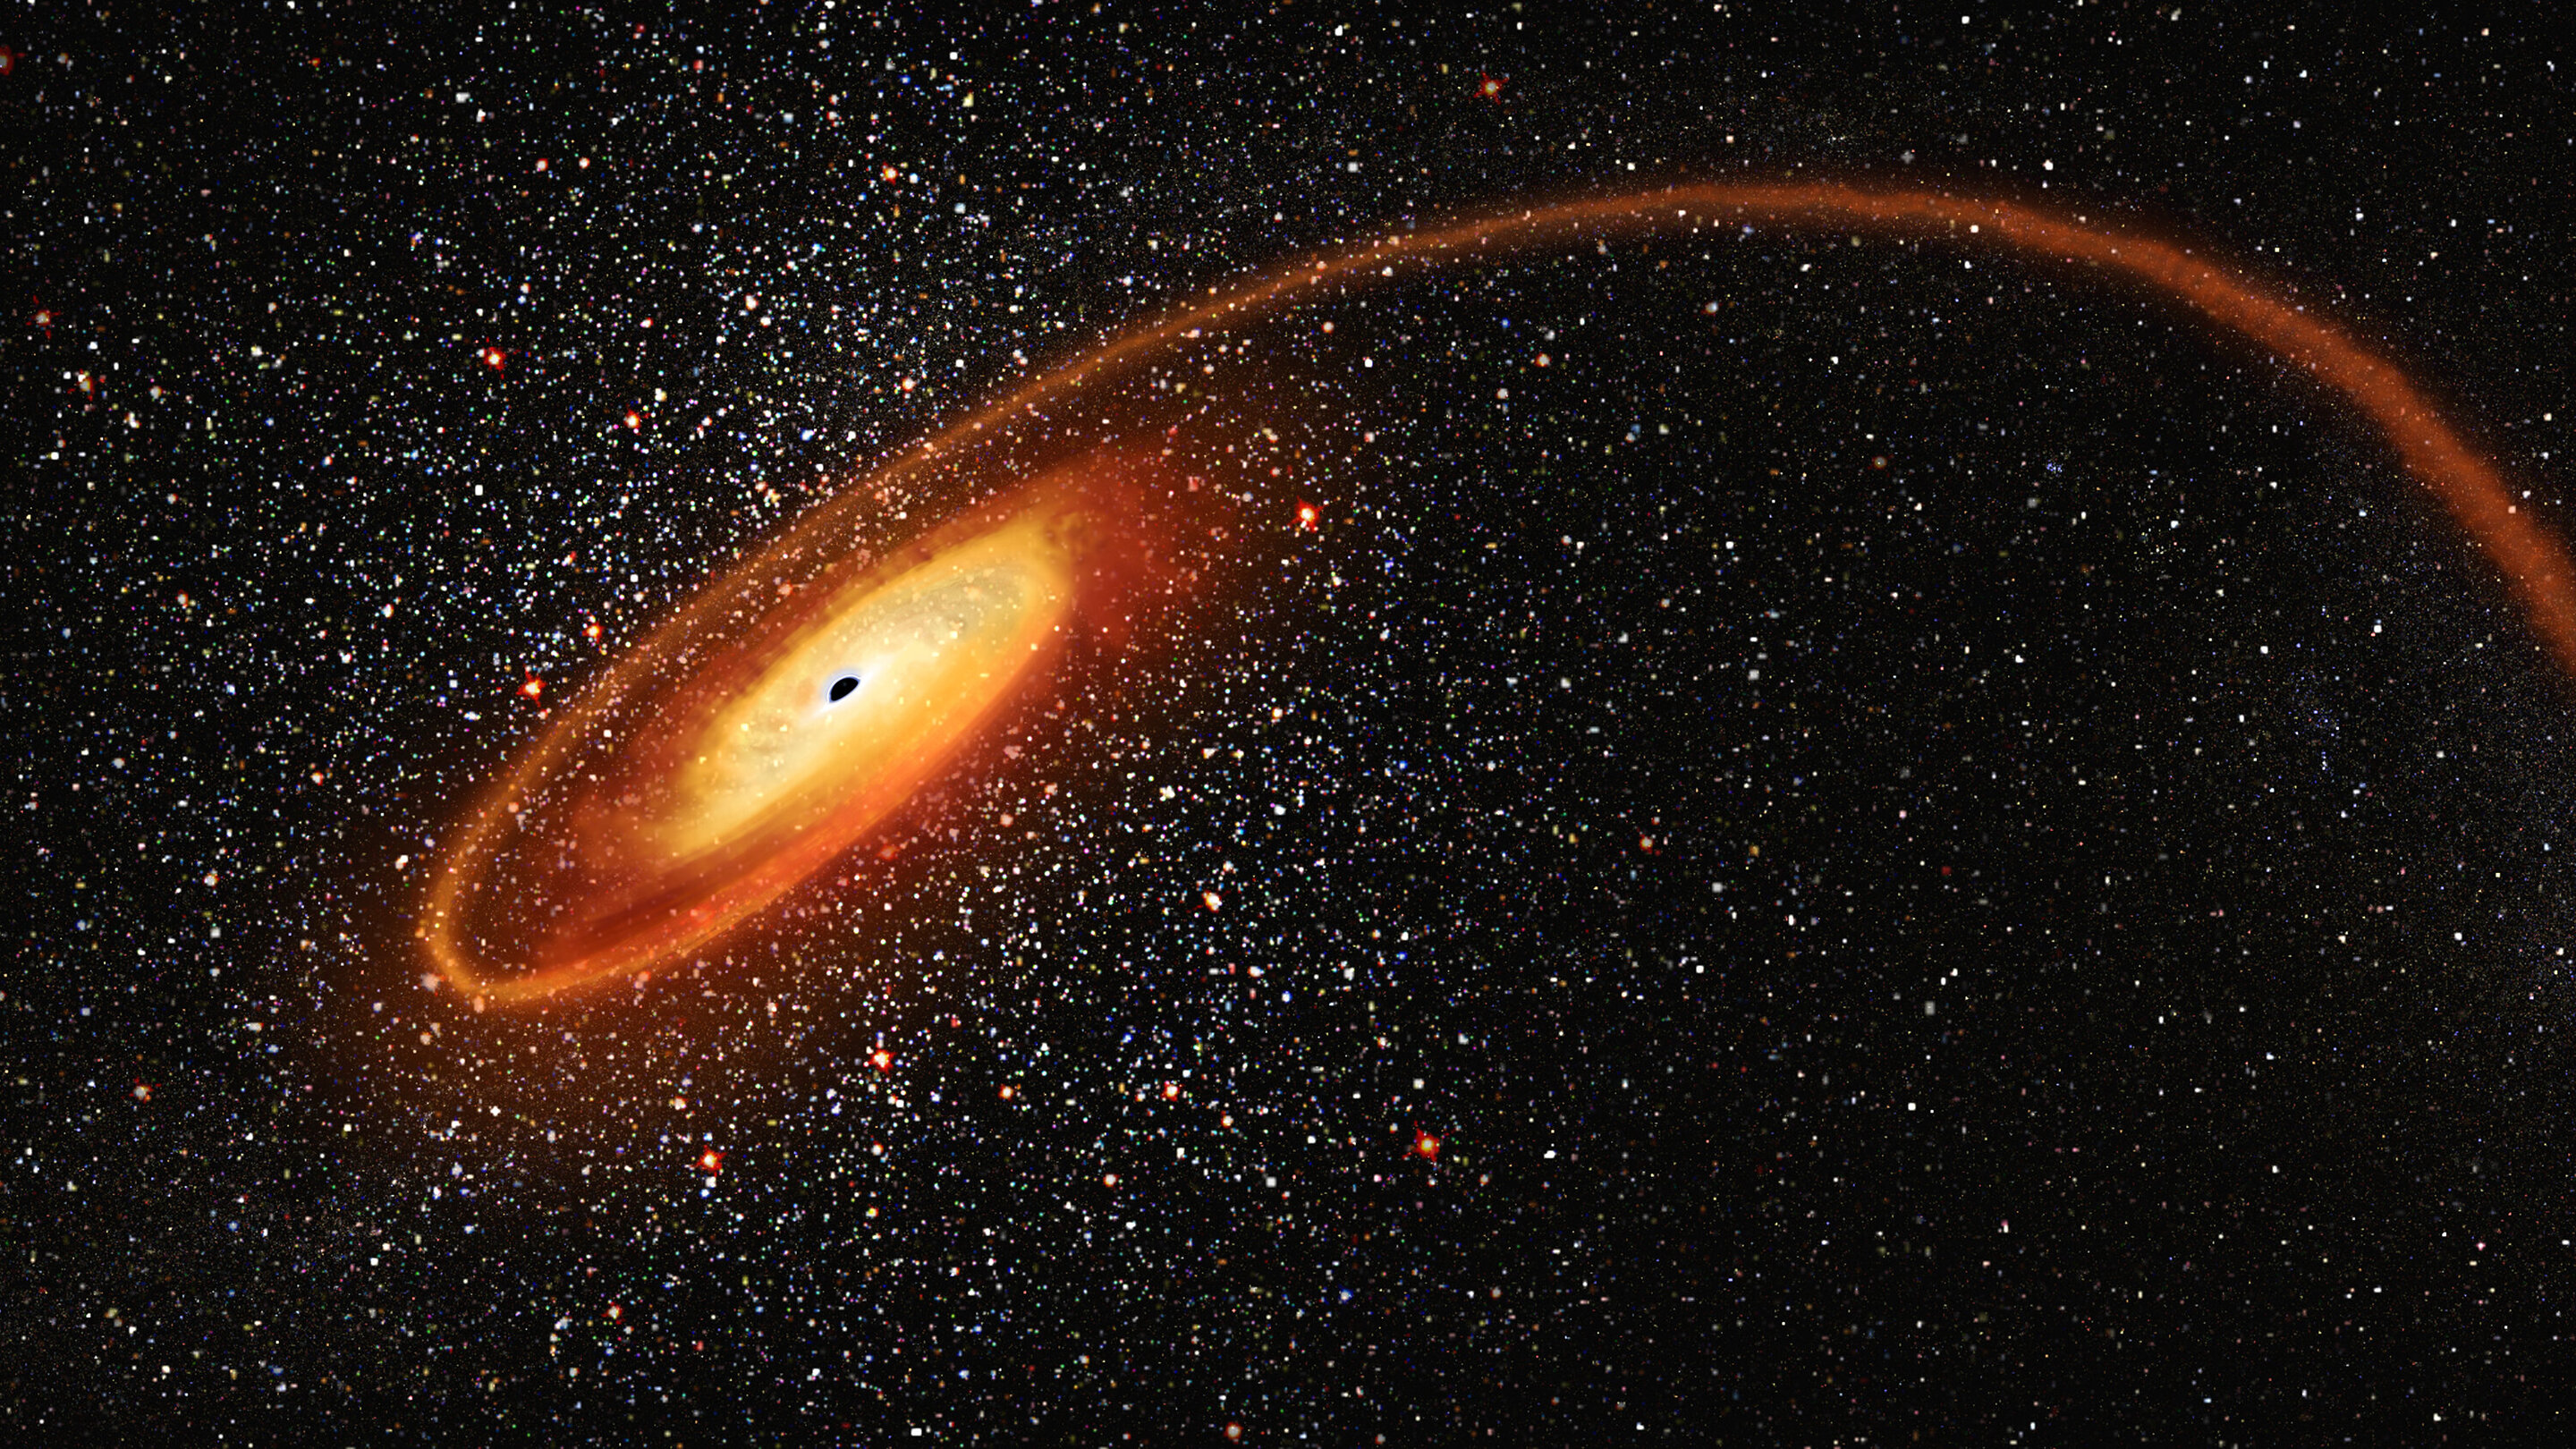 black hole imaged for first time by event horizon telescope